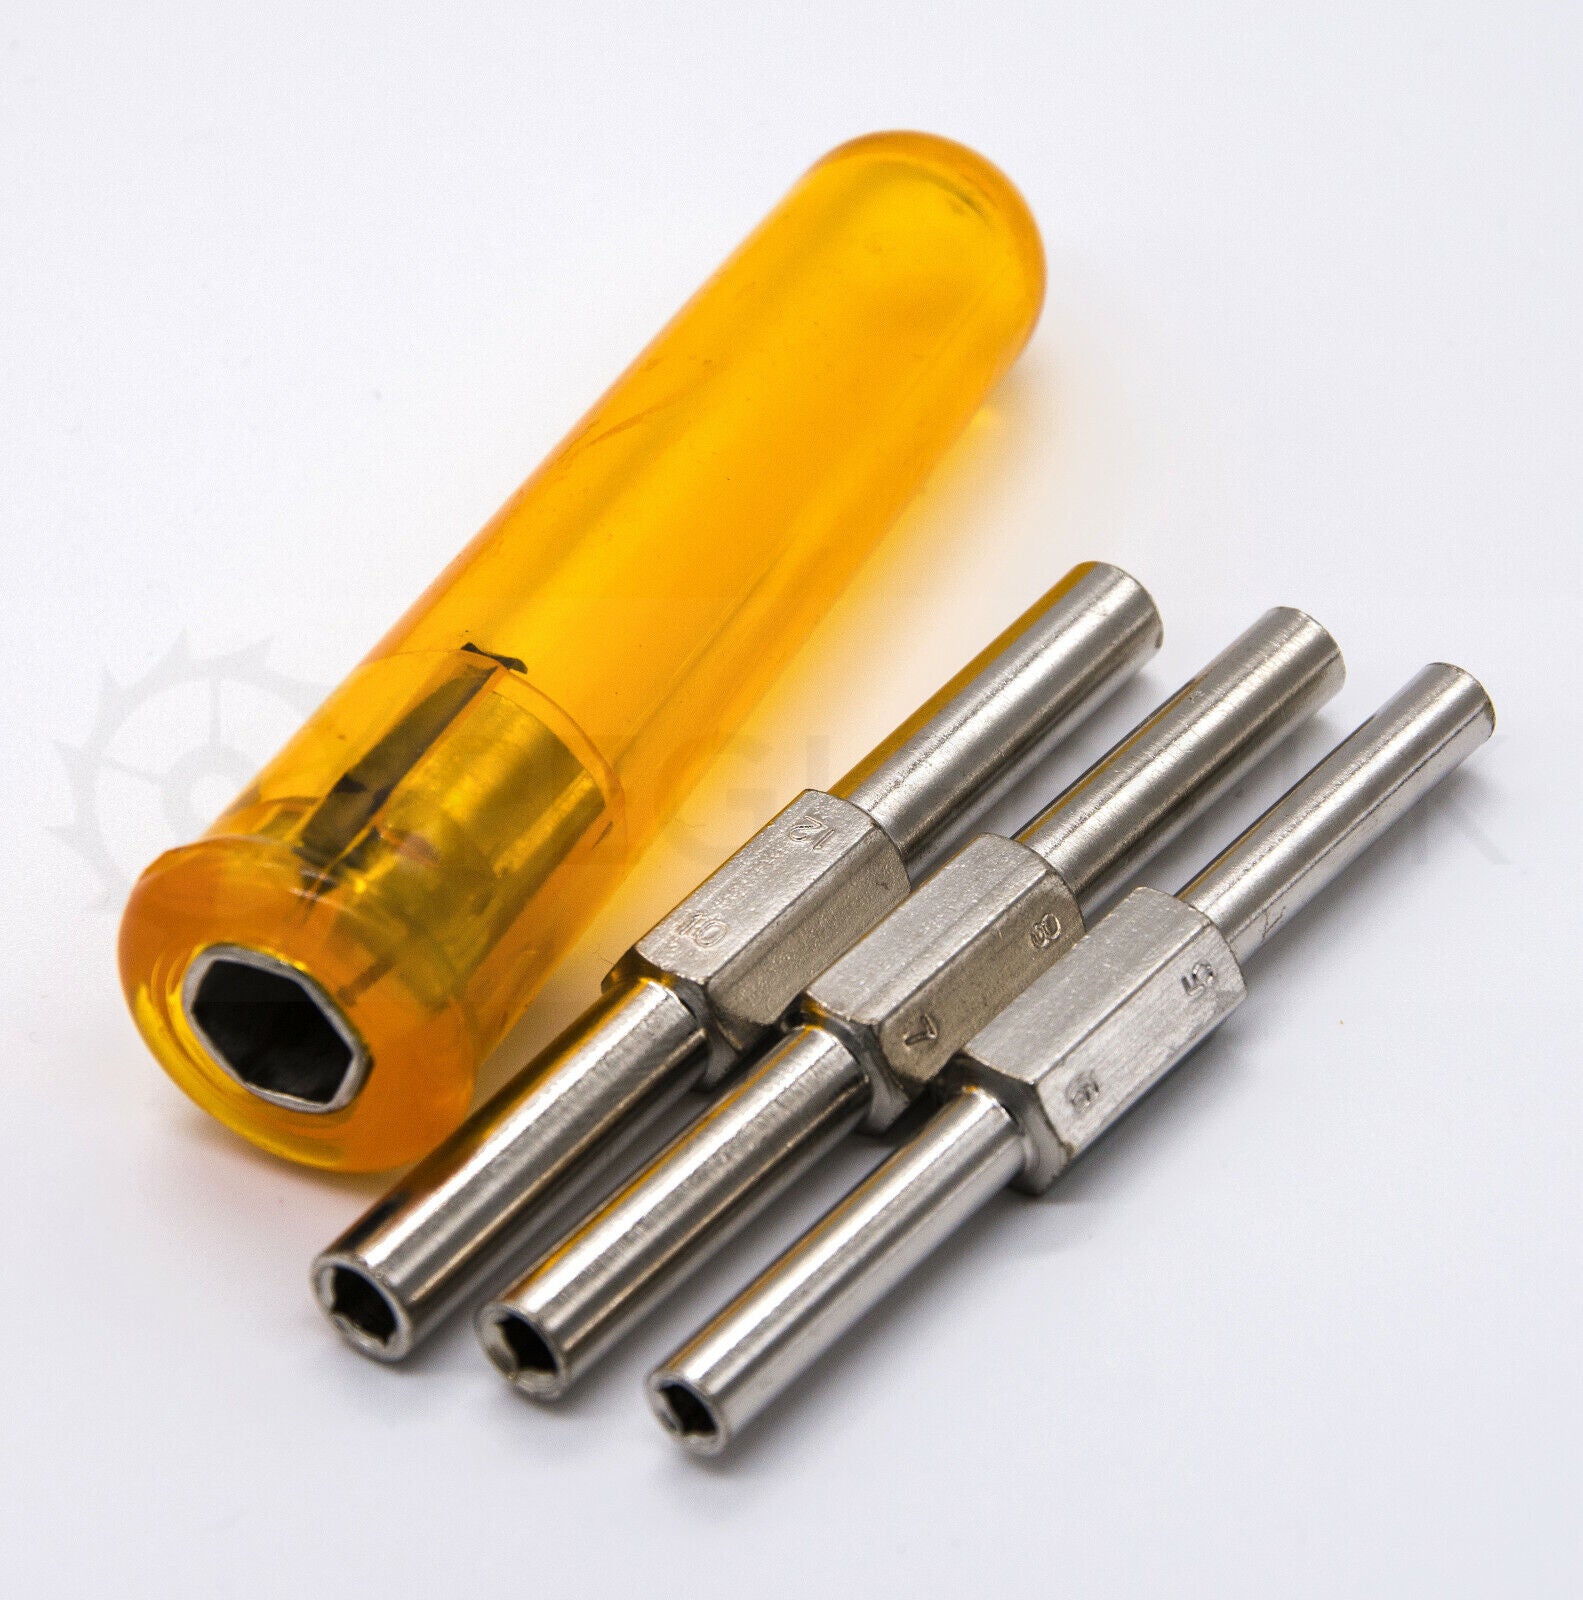 Mainspring Let Down Tool with 3 Key Shafts